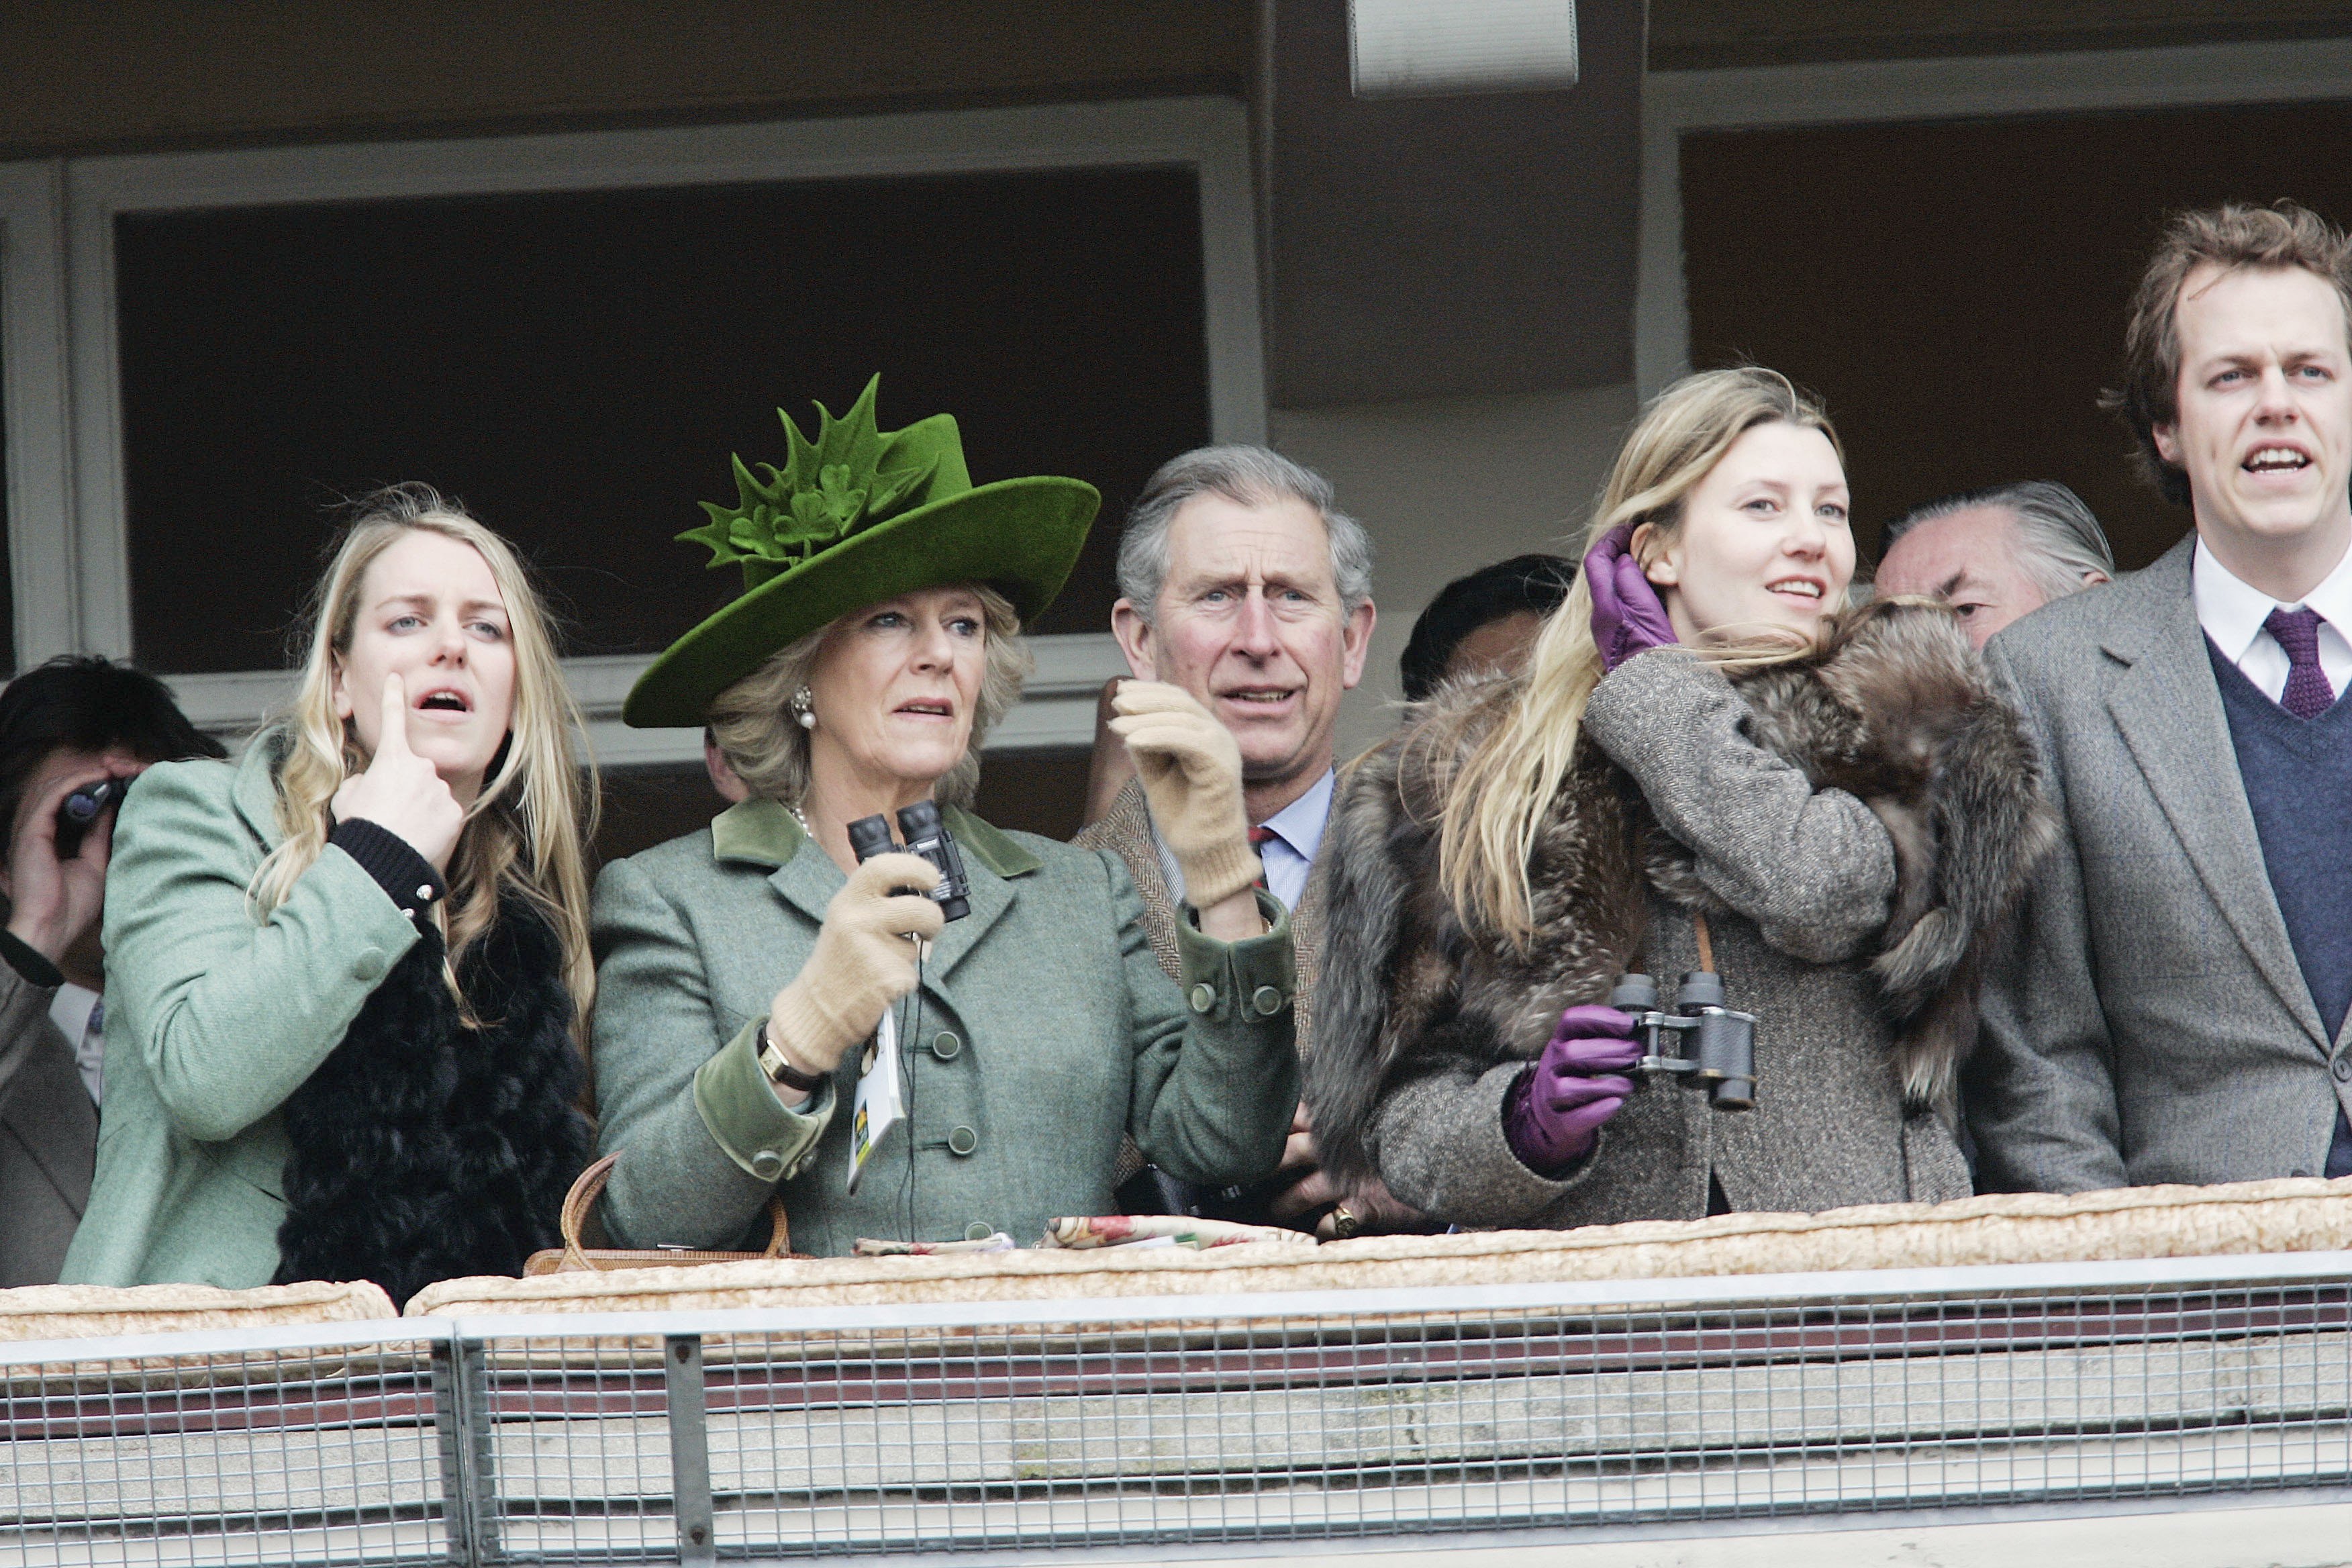 Camilla, Duchess of Cornwall and Prince Charles, Prince of Wales watch the Gold Cup race on the fourth day of Cheltenham Races with Tom Parker-Bowles and his wife, Sara Parker-Bowles, and Laura Parker-Bowles, on March 17, 2006 in Cheltenham, England. | Source: Getty Images 